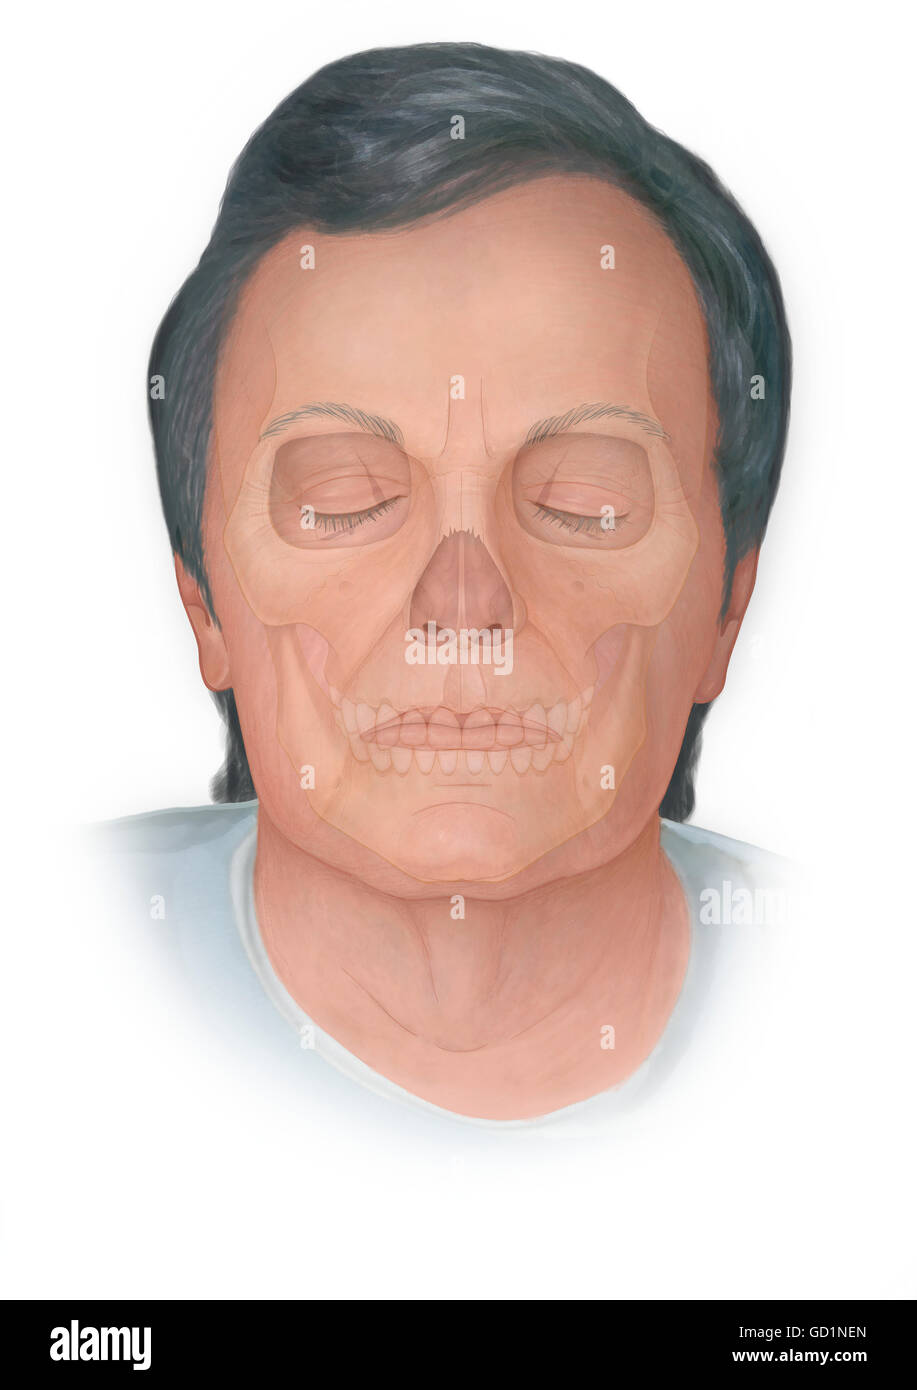 Front view of normal elderly face with a skull phantomed behind Stock Photo